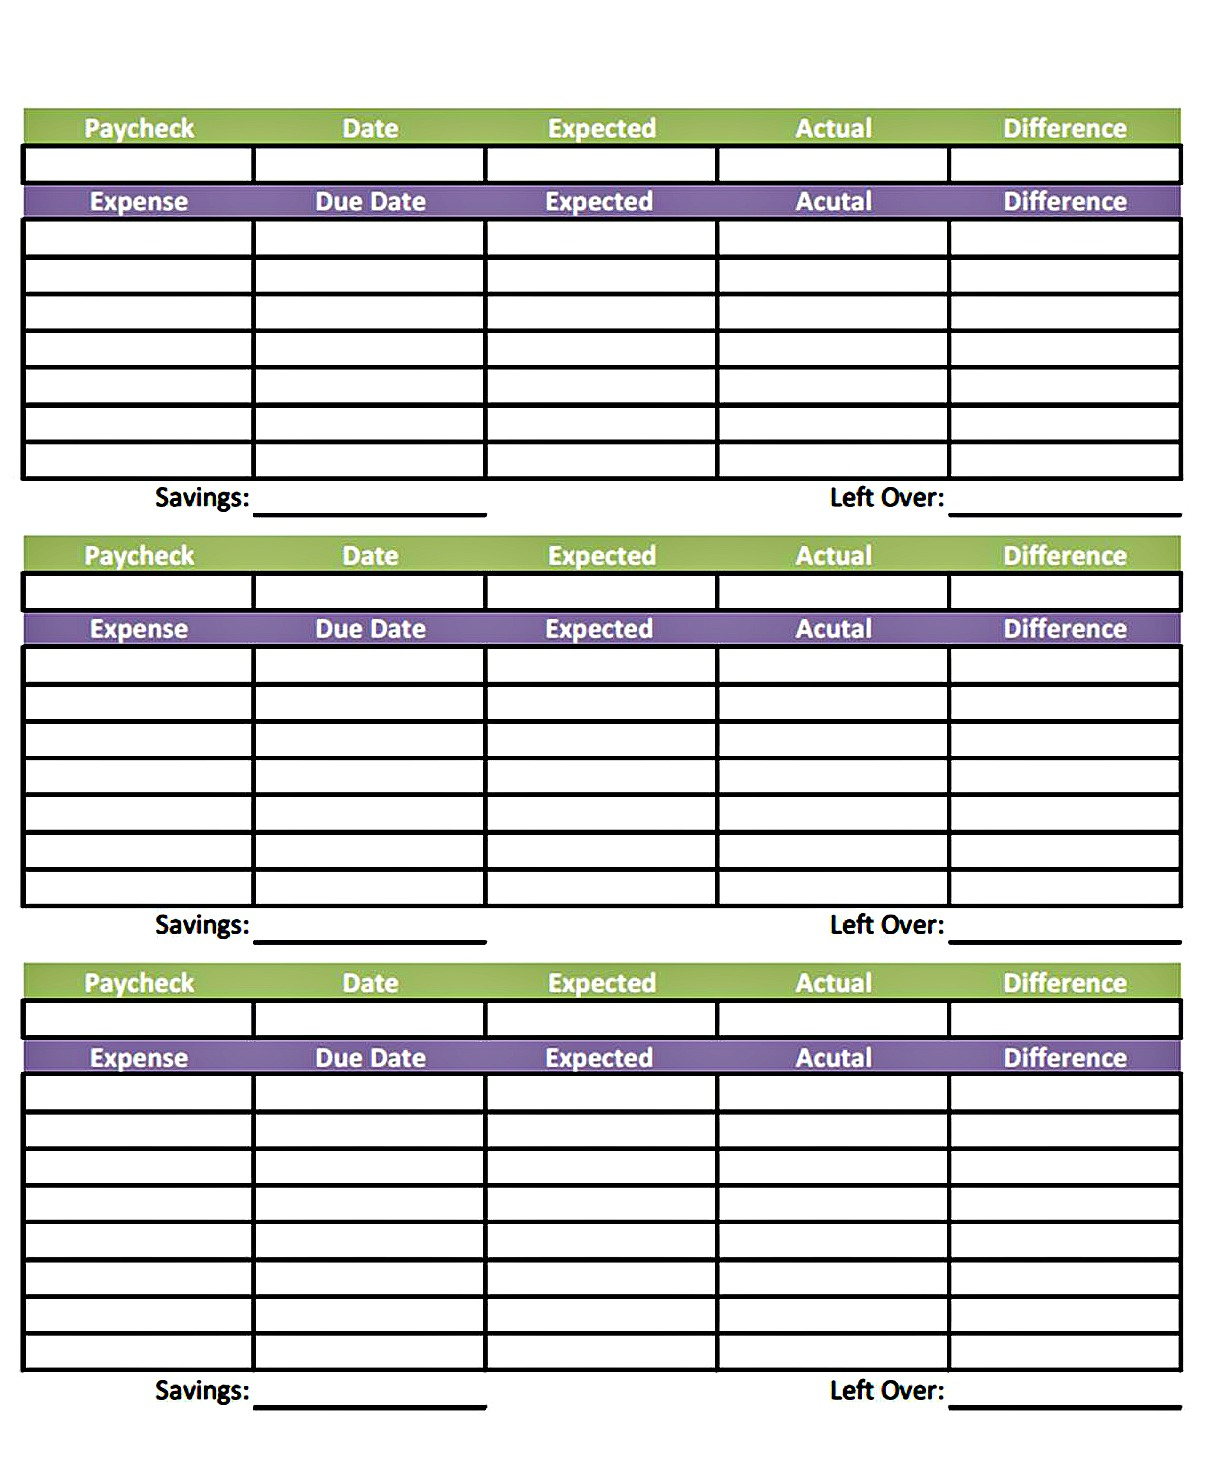 Weekly Paycheck Budget Spreadsheet —